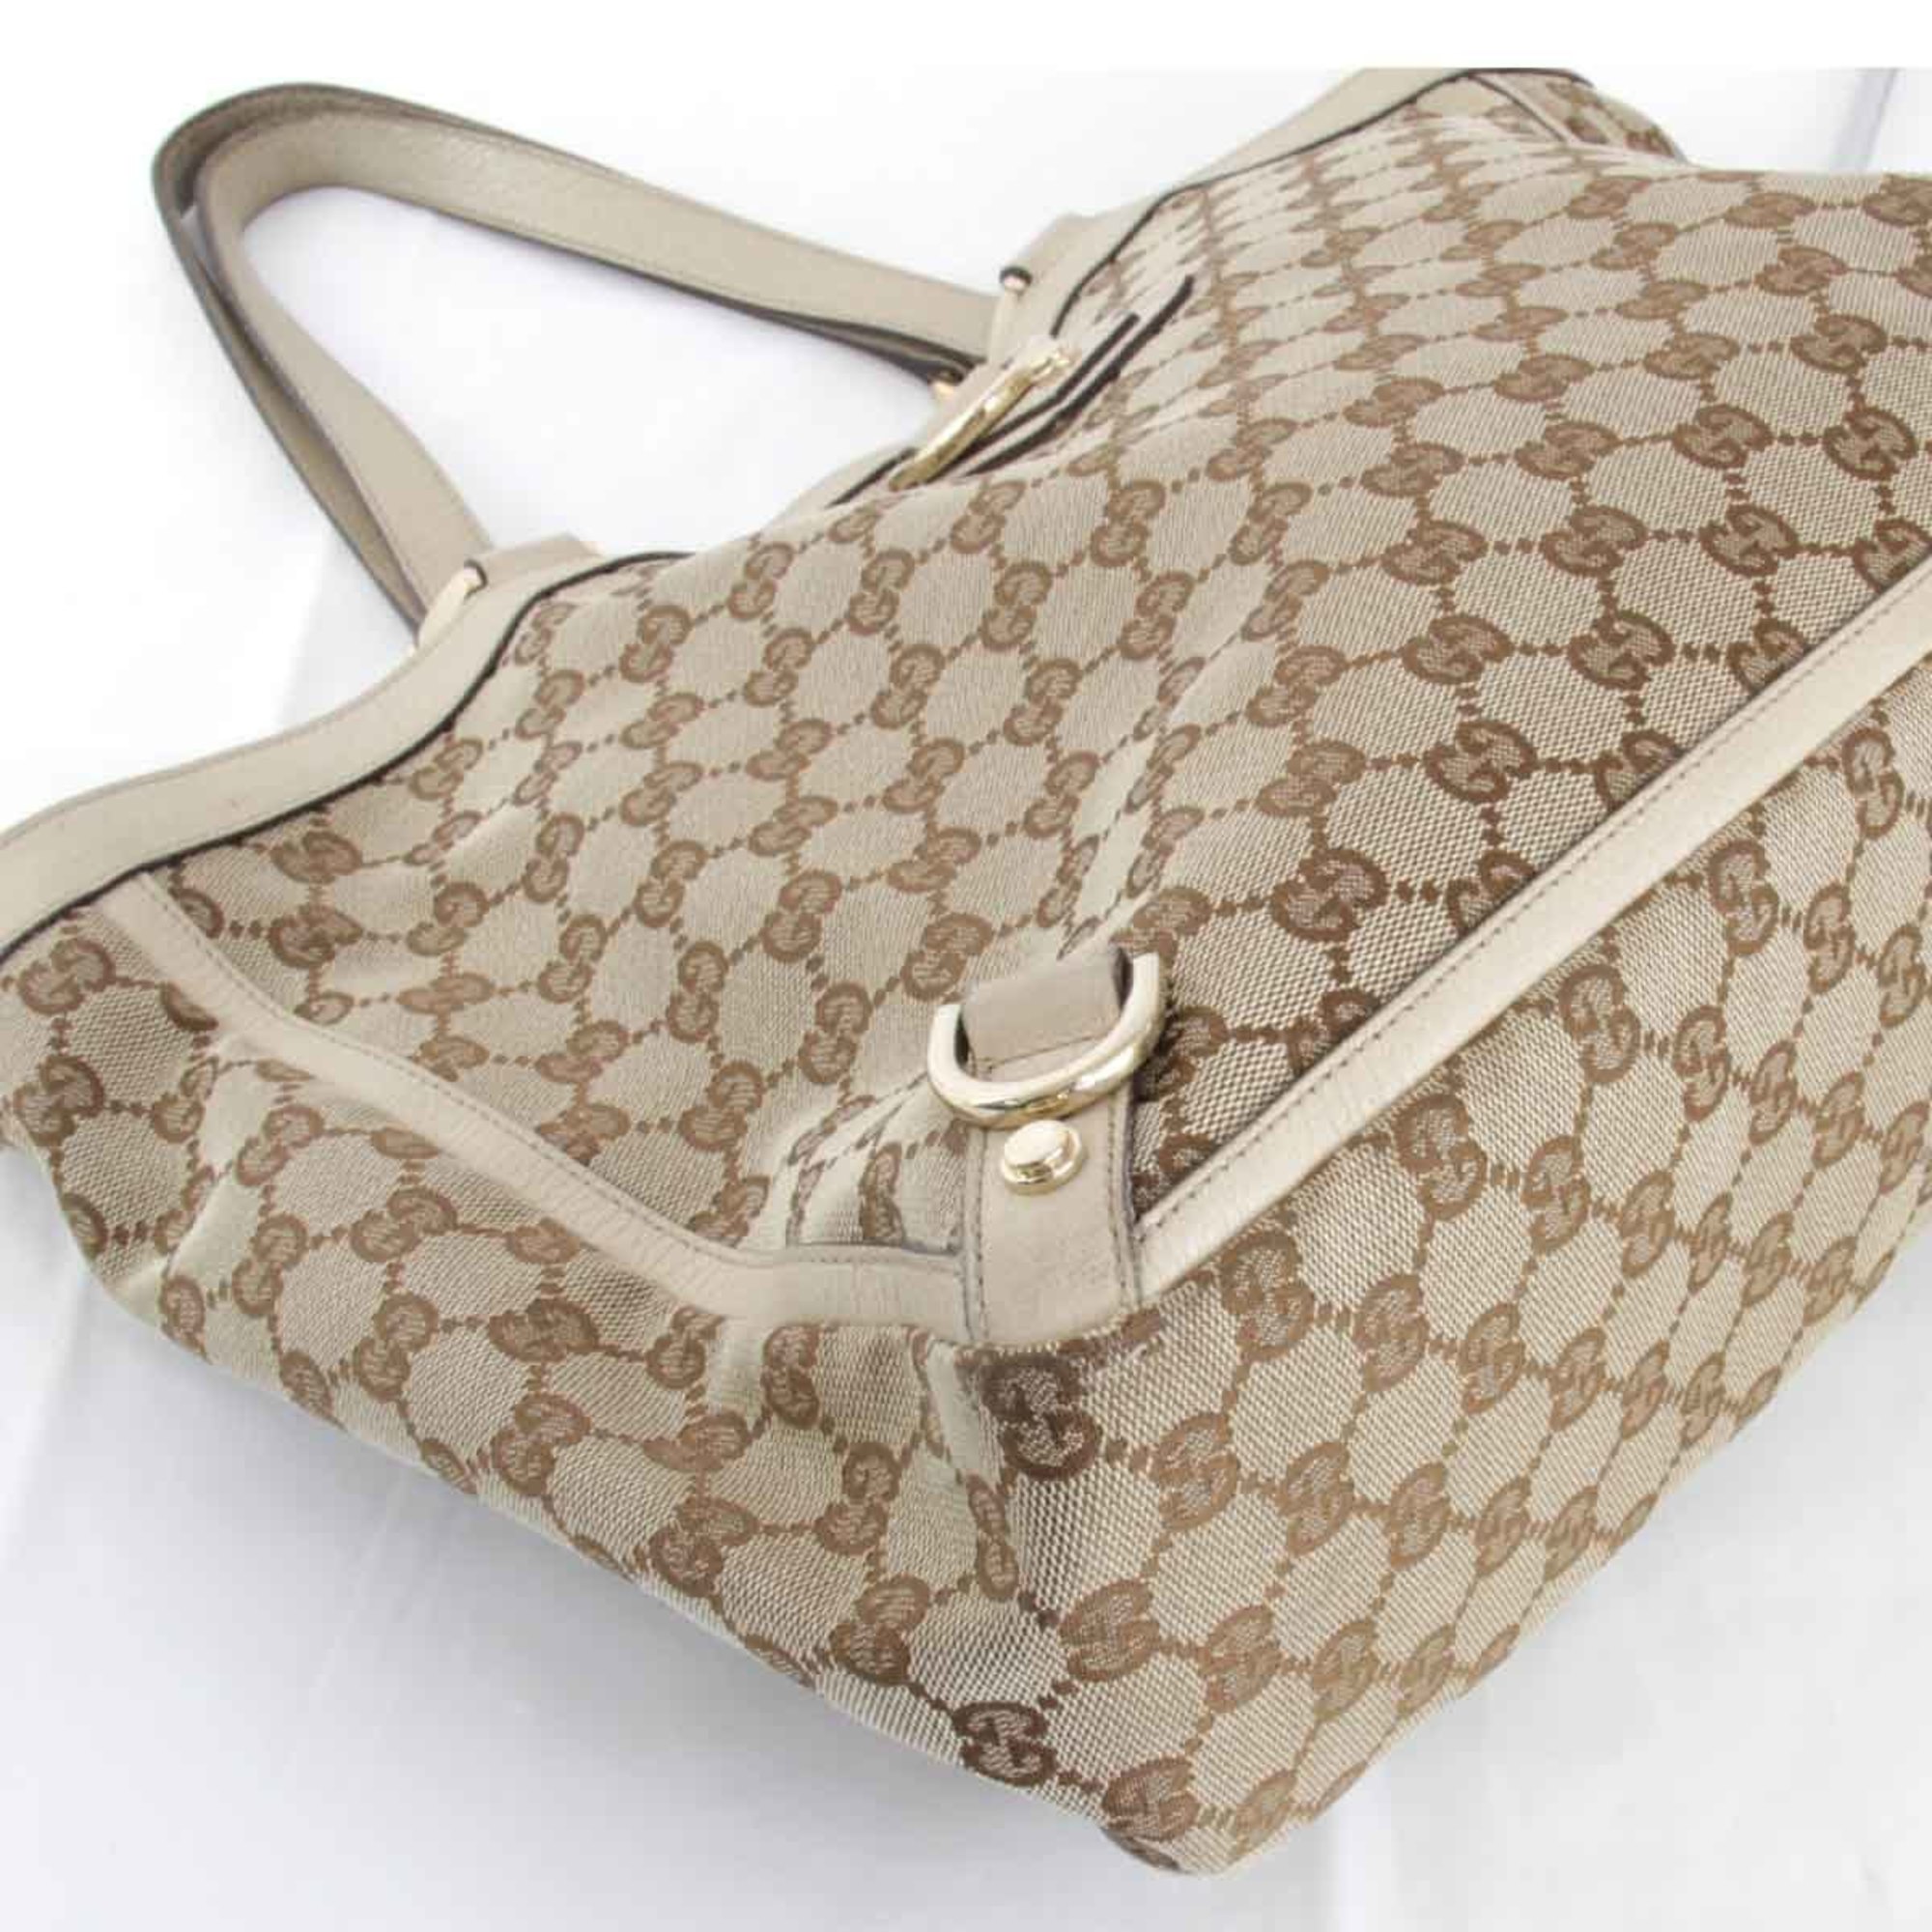 GUCCI Abby Tote Bag GG Canvas Brown Women's